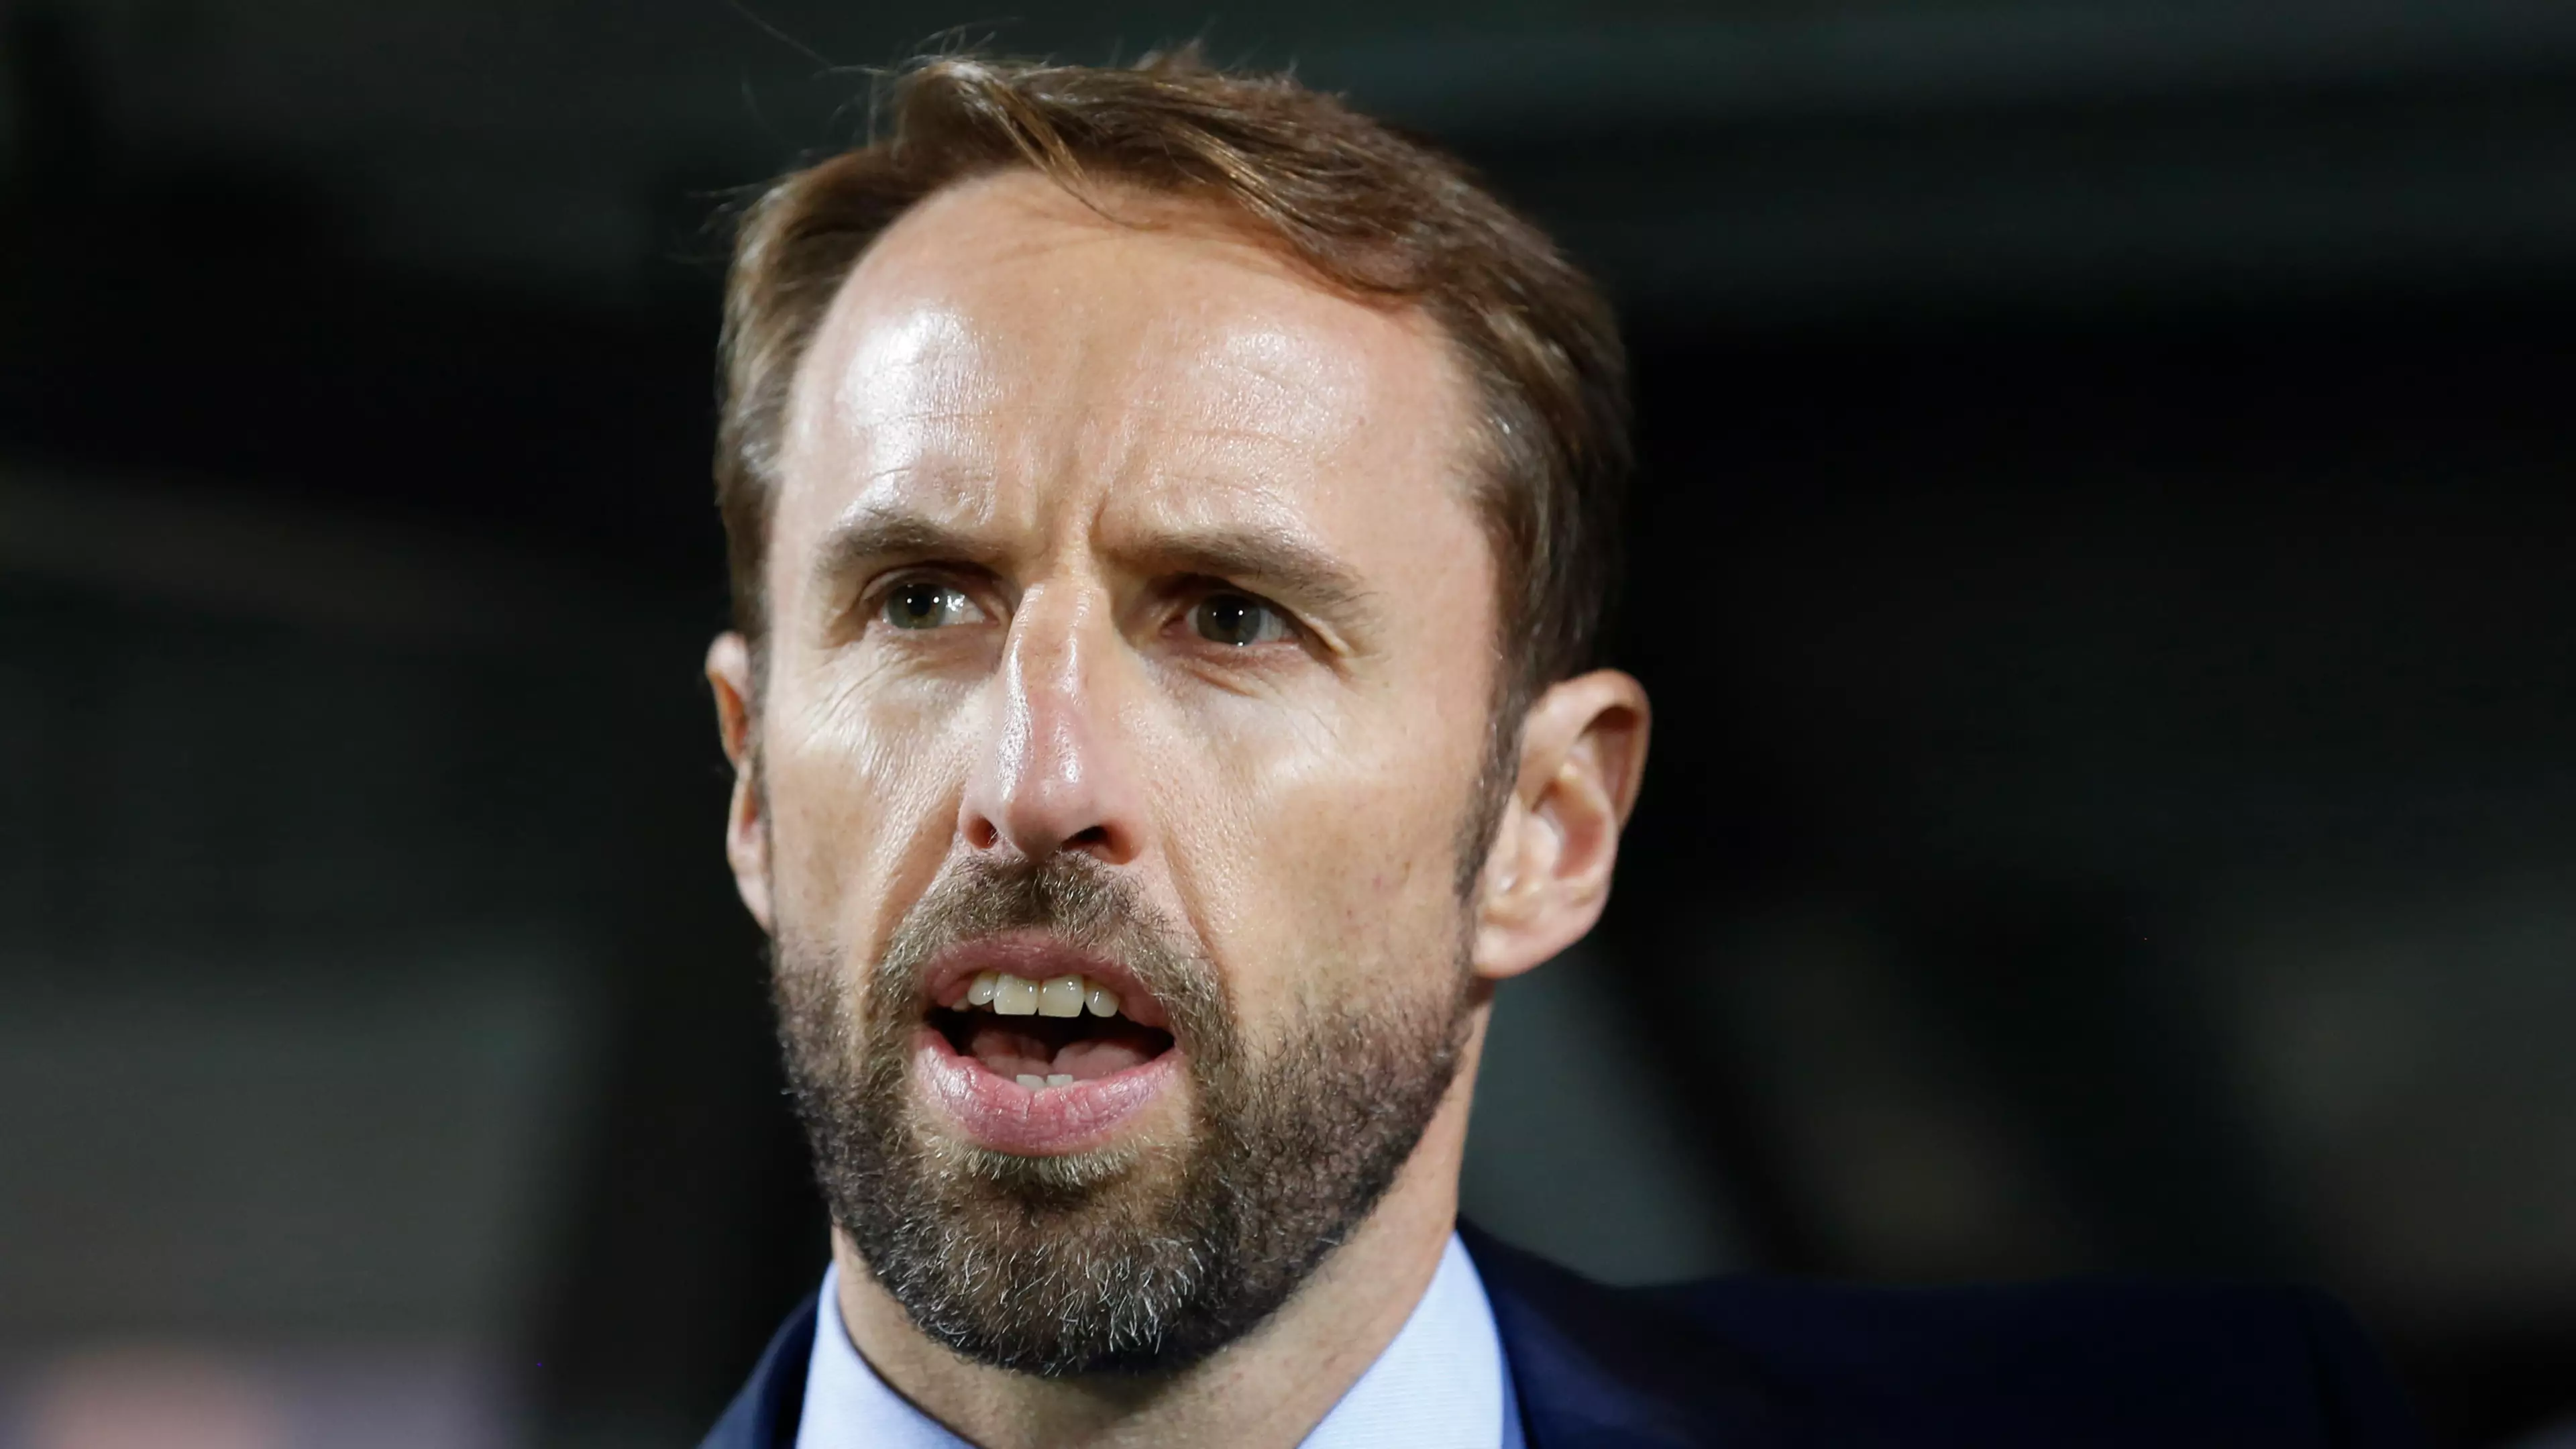 England's Expected XI To Play Spain In Seville Revealed